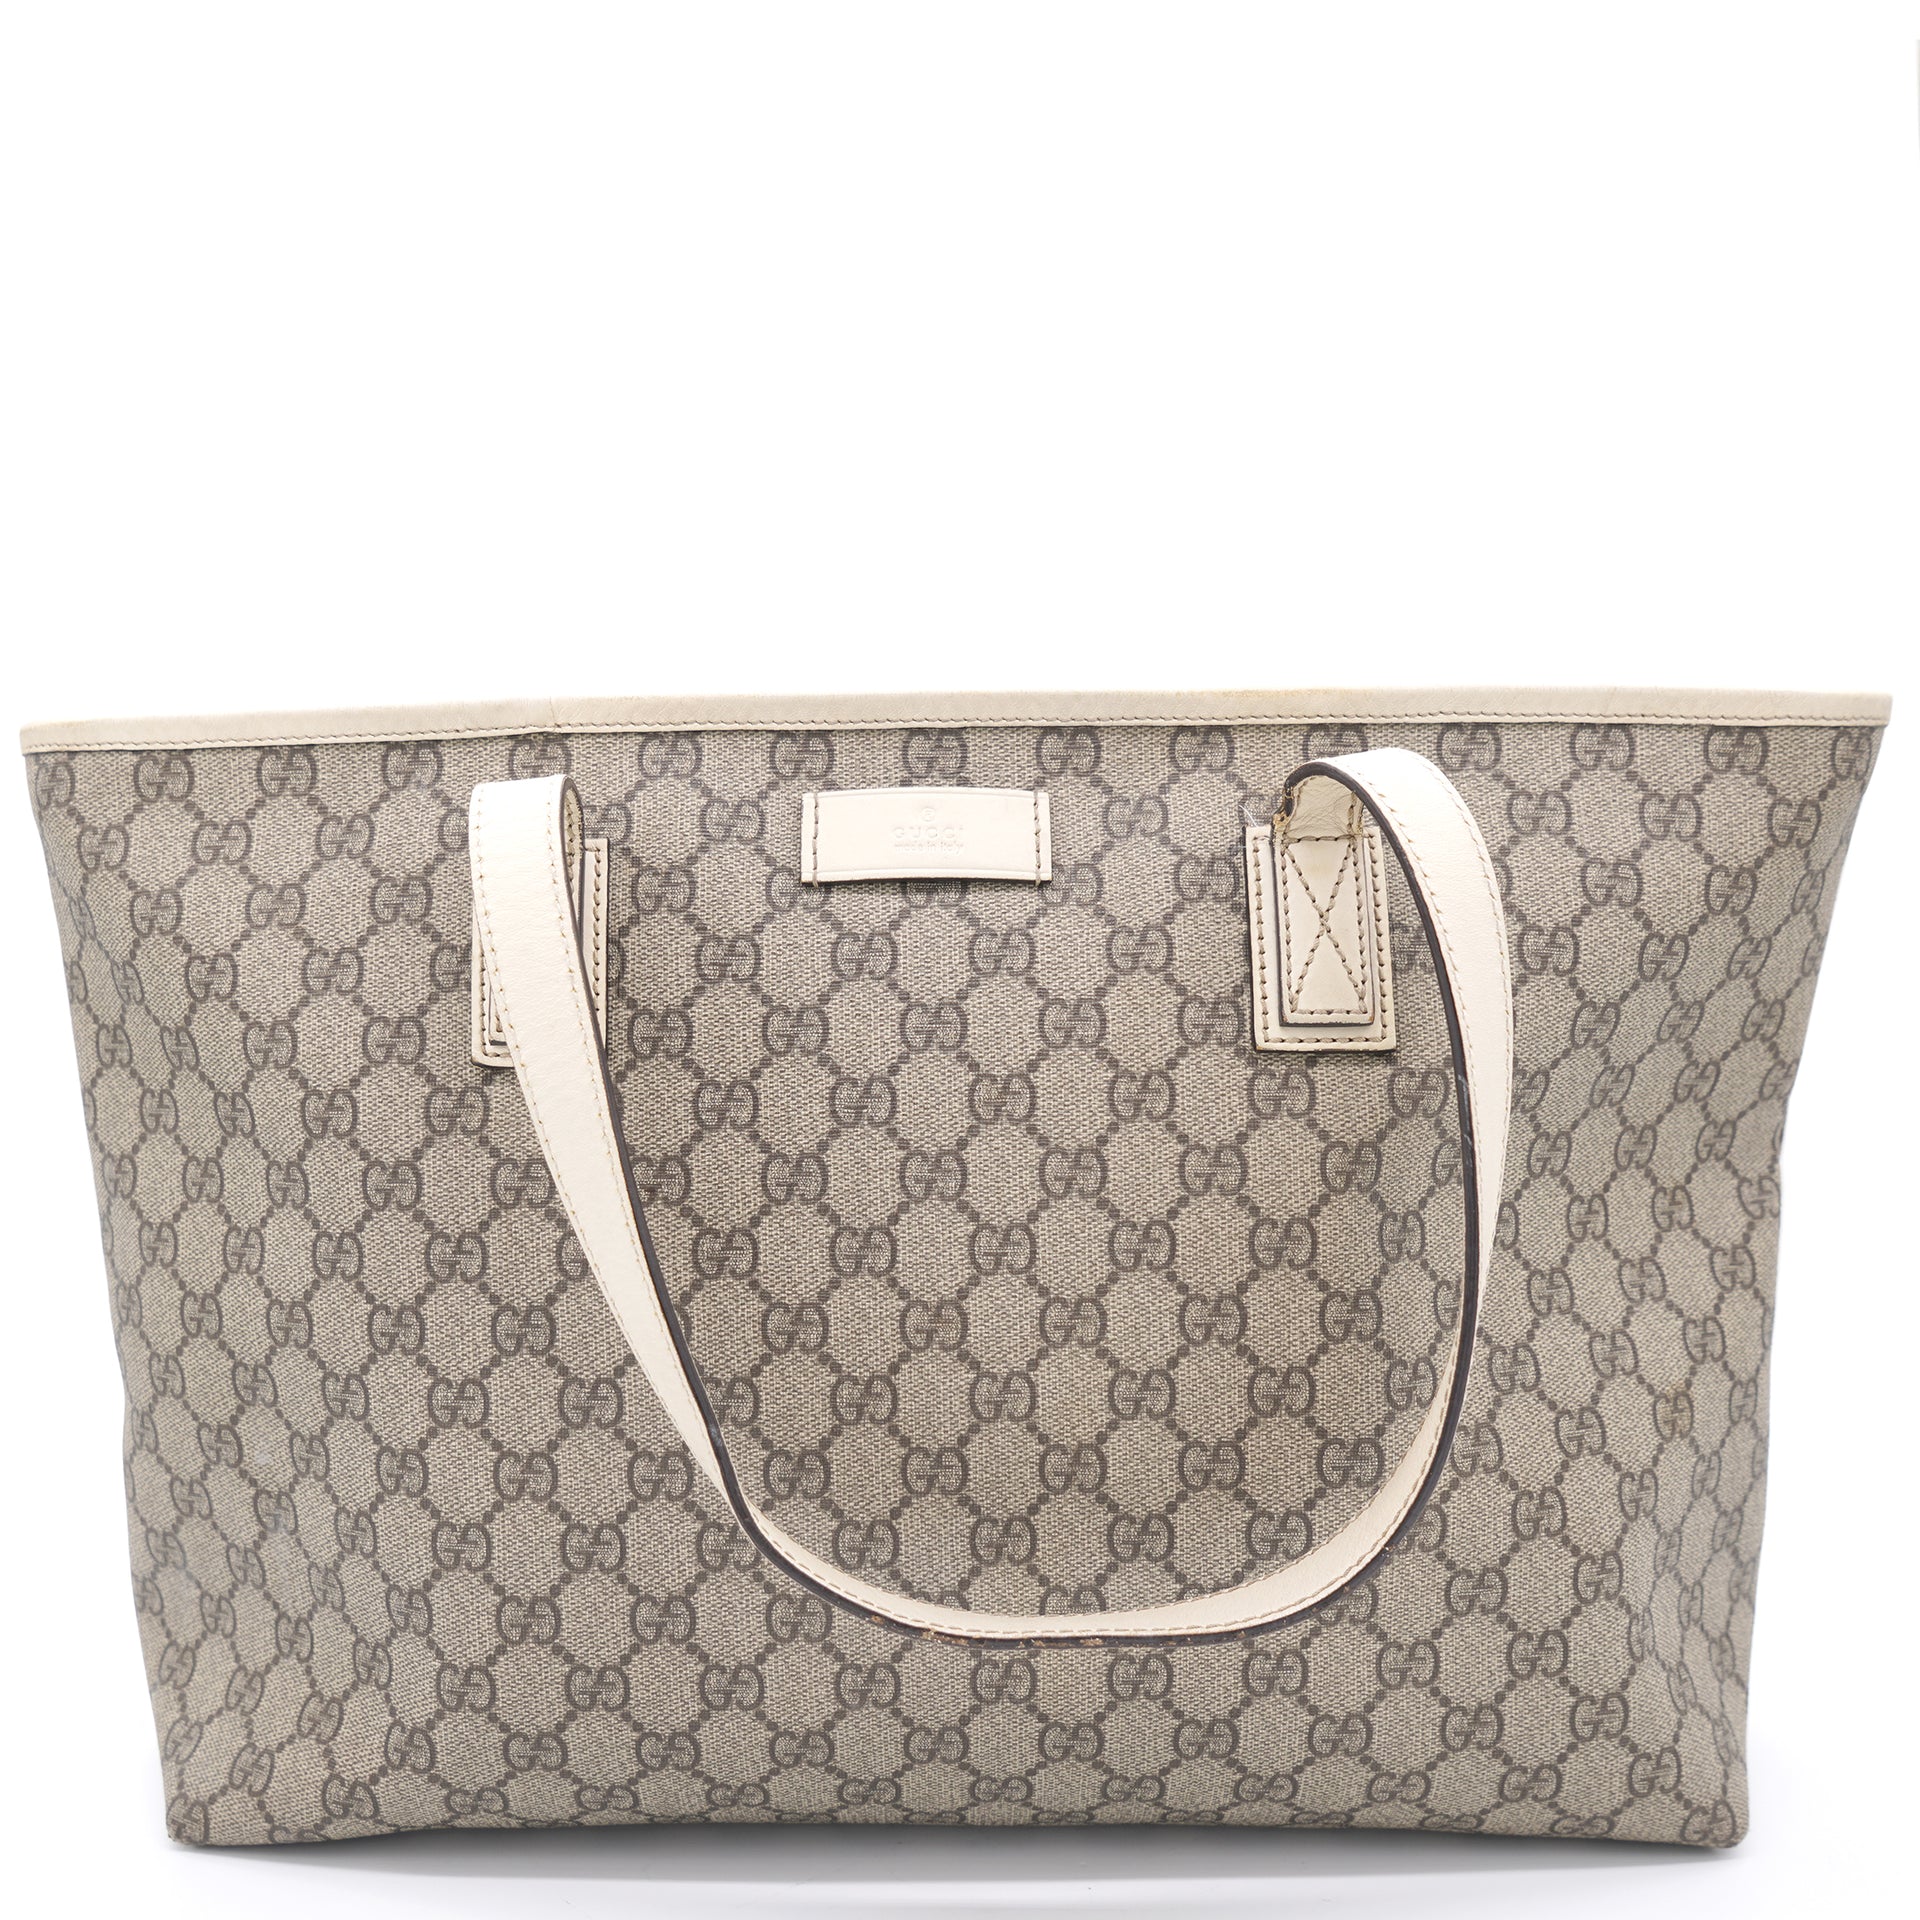 Gucci Supreme Gg Canvas Top Handle Bag In Beige,brown